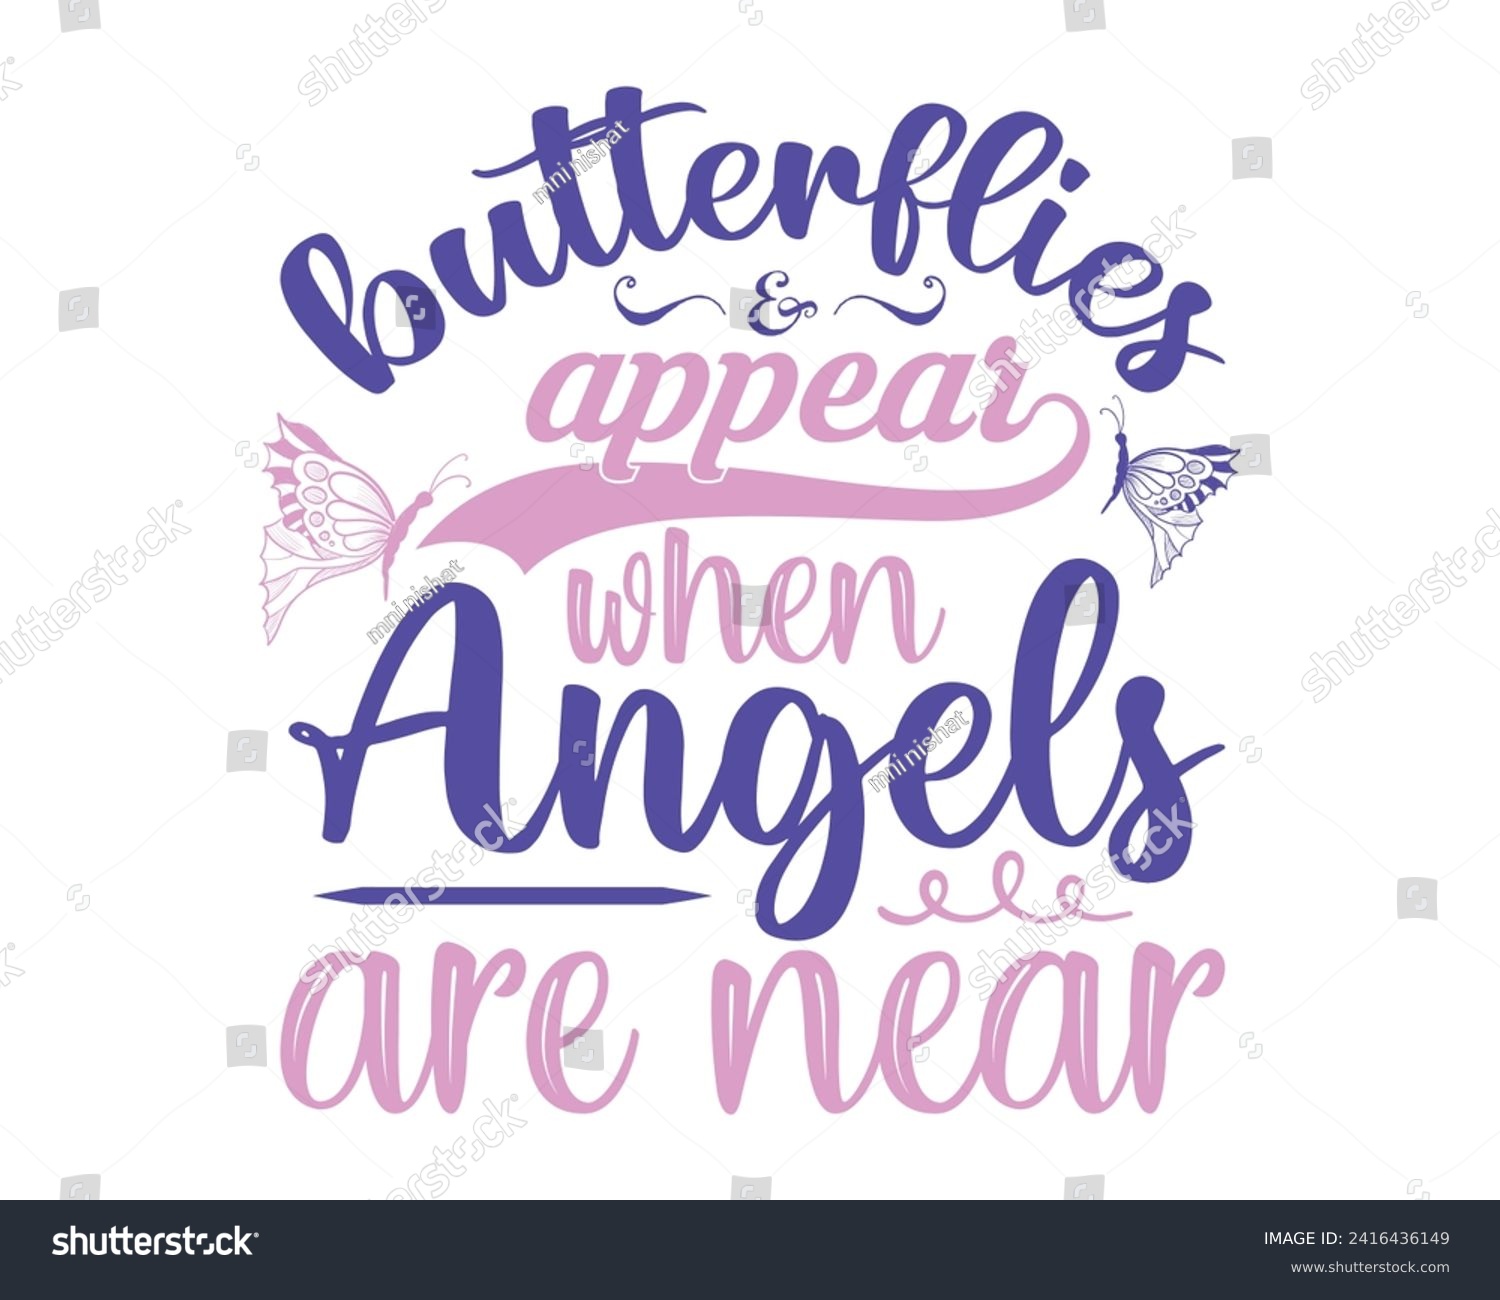 SVG of butterflies appear when angels are near 2 svg